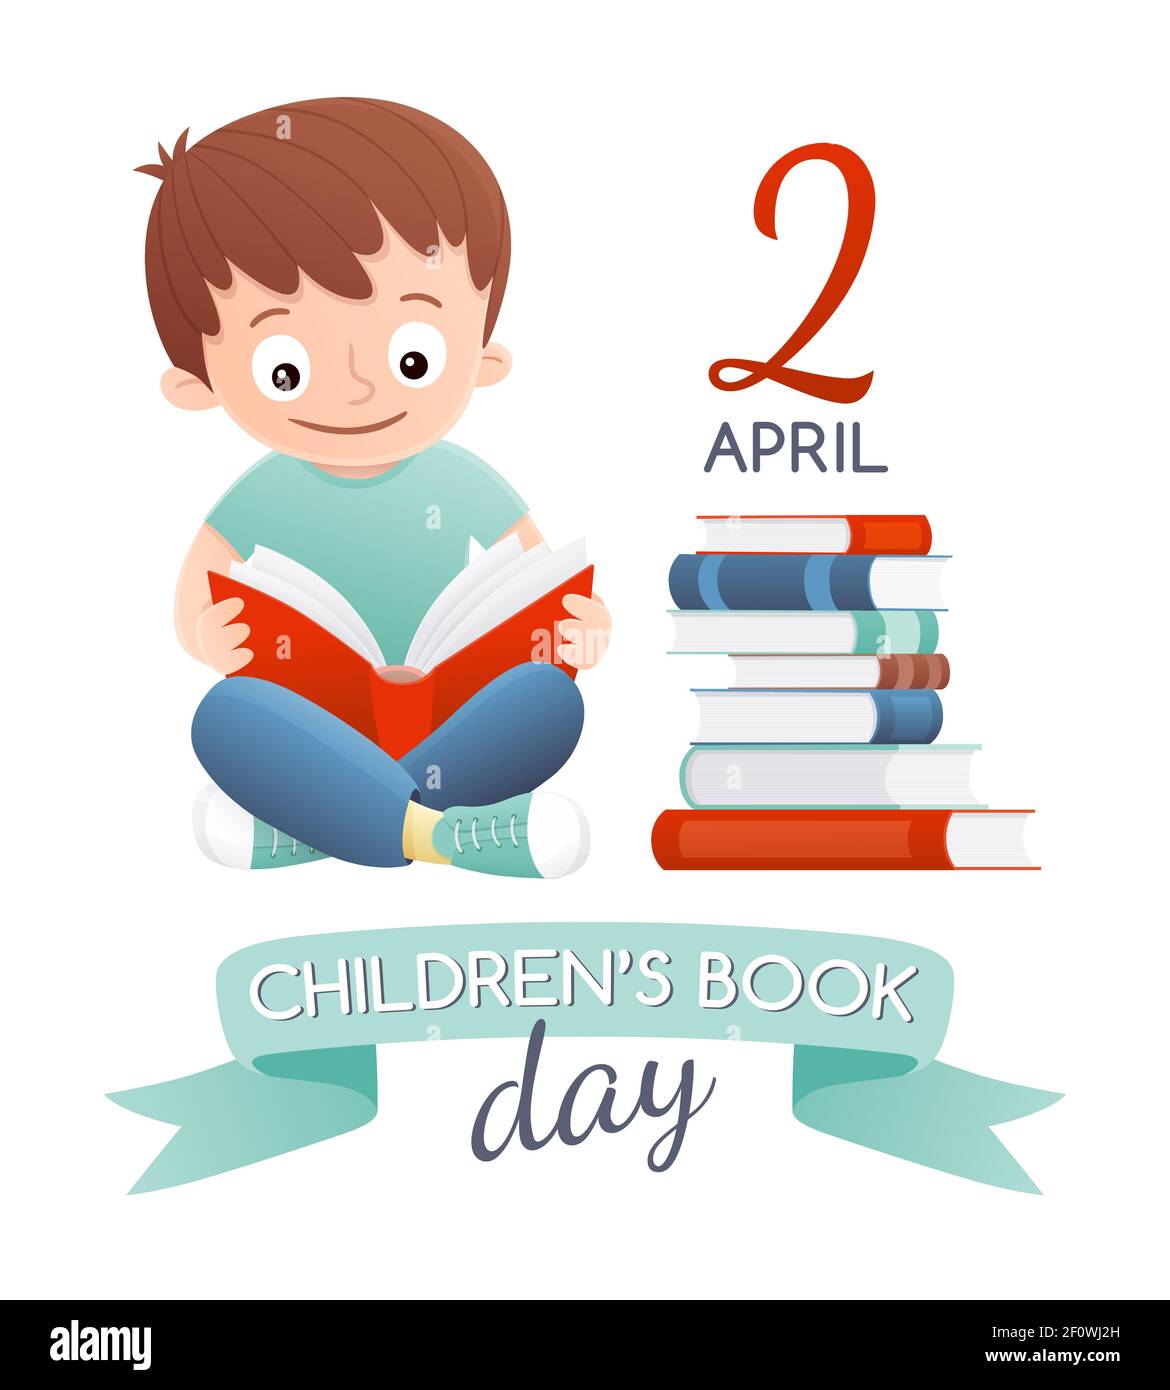 International Children's book day poster. A boy reading next to a pile of books. Vector illustration. Stock Vector